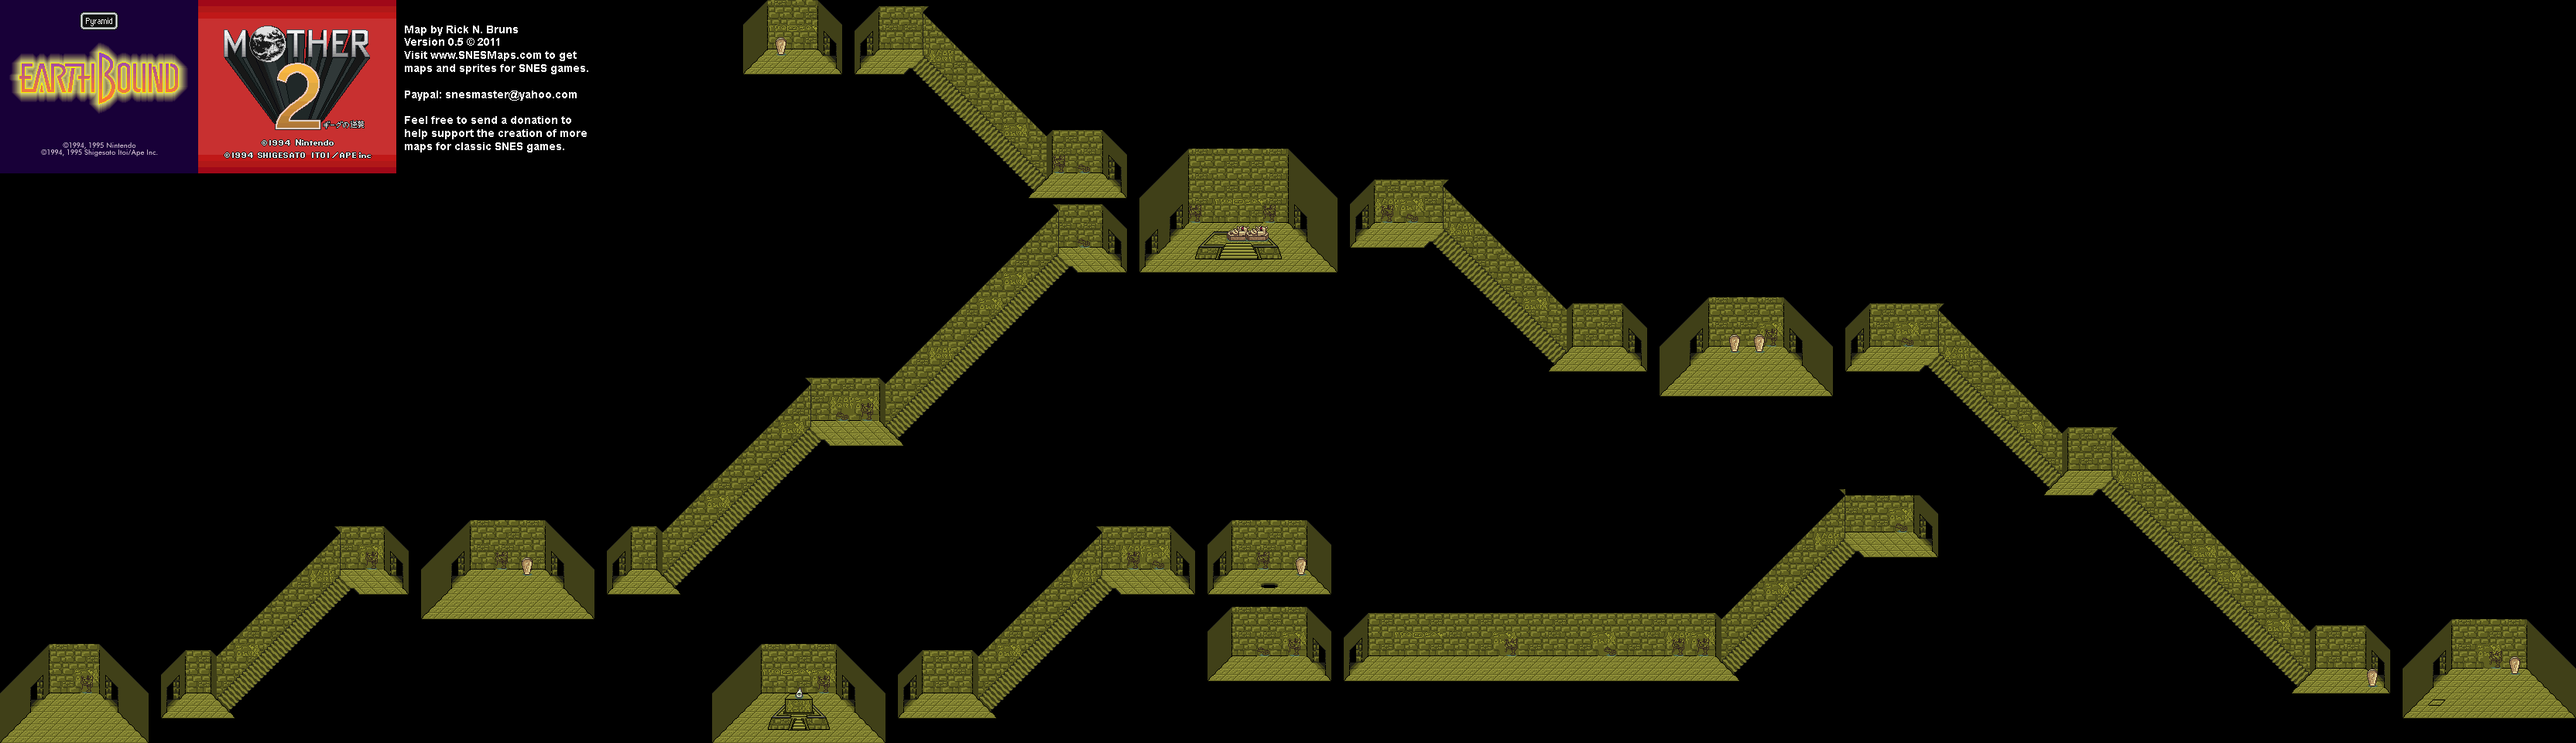 EarthBound (Mother 2) - Pyramid Super Nintendo SNES Map